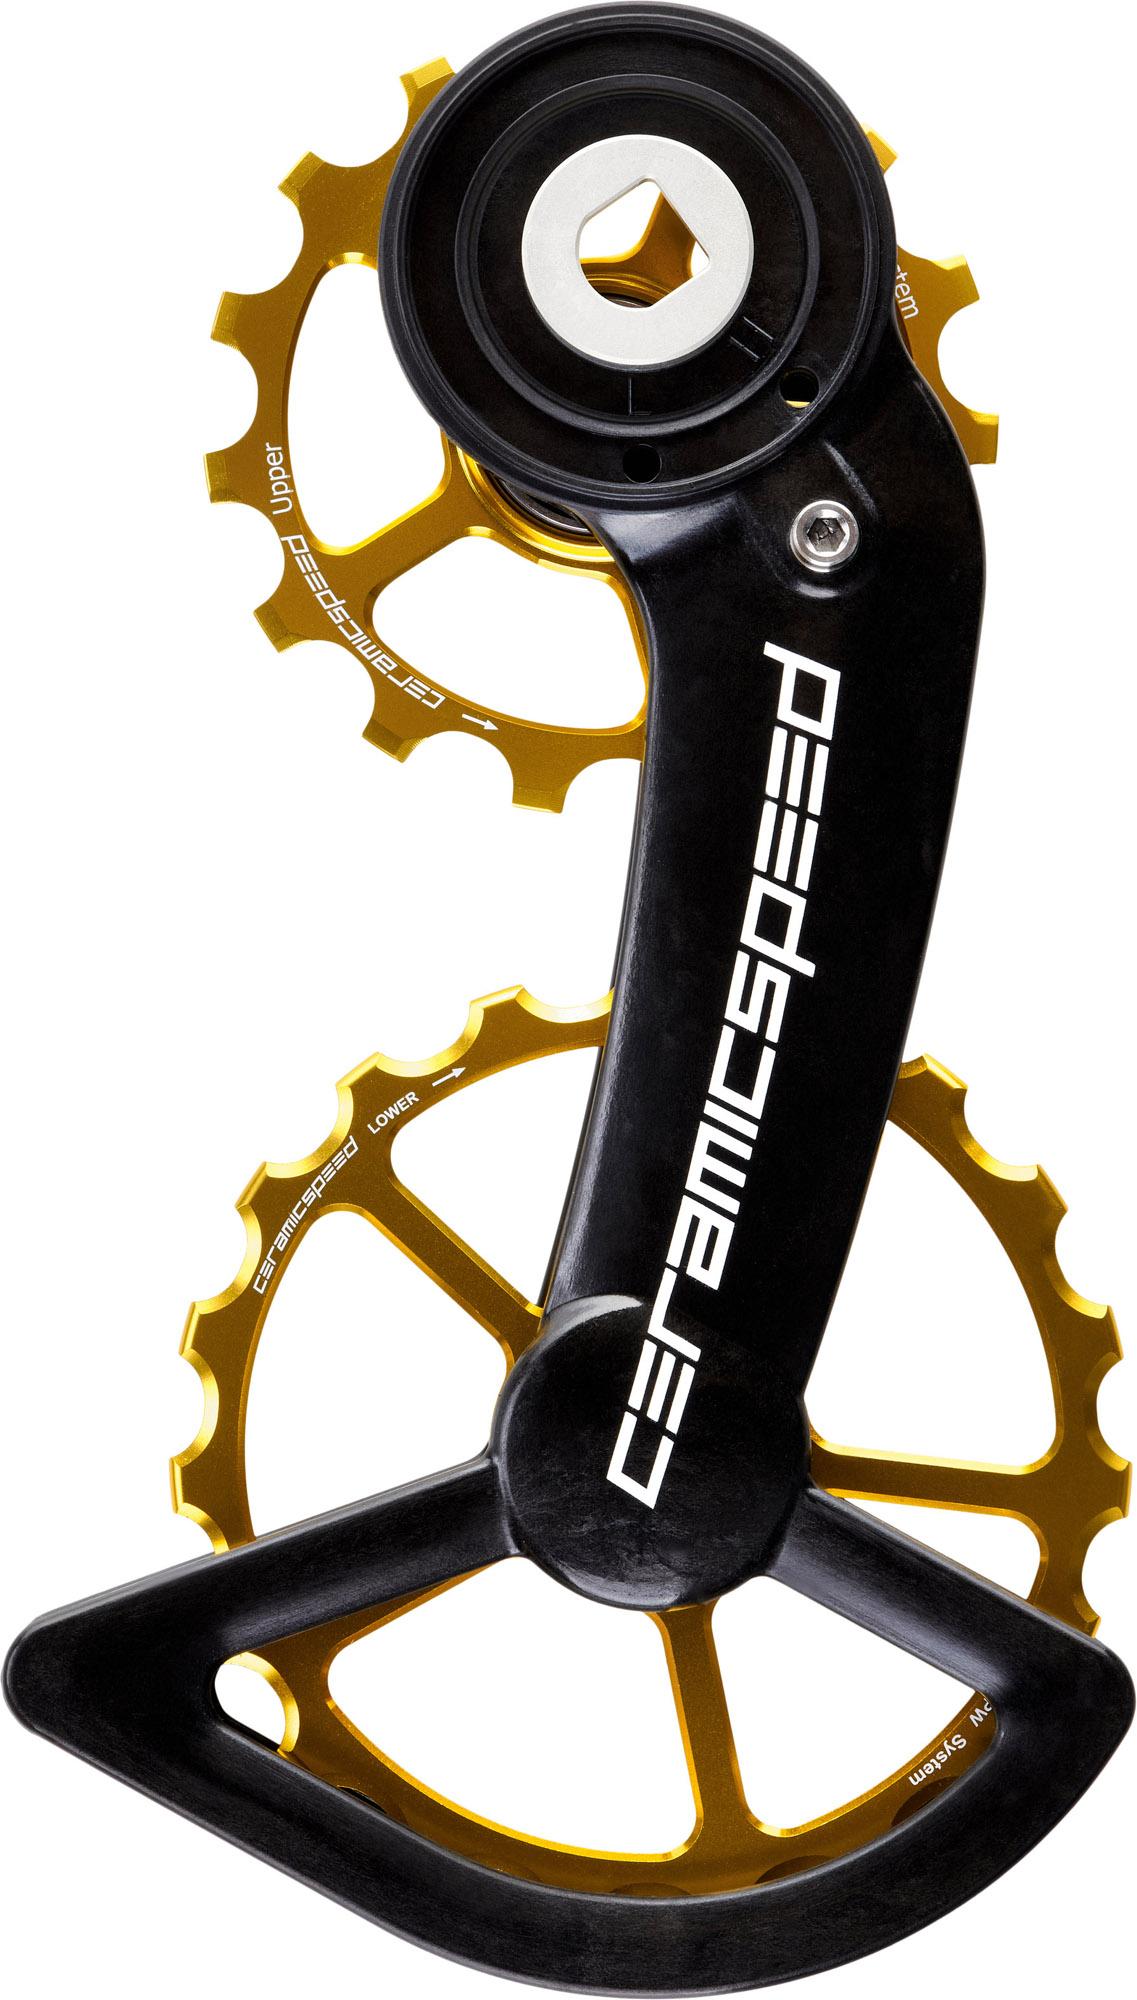 Ceramicspeed Ospw System Sram Red-force Axs Gold  Gold